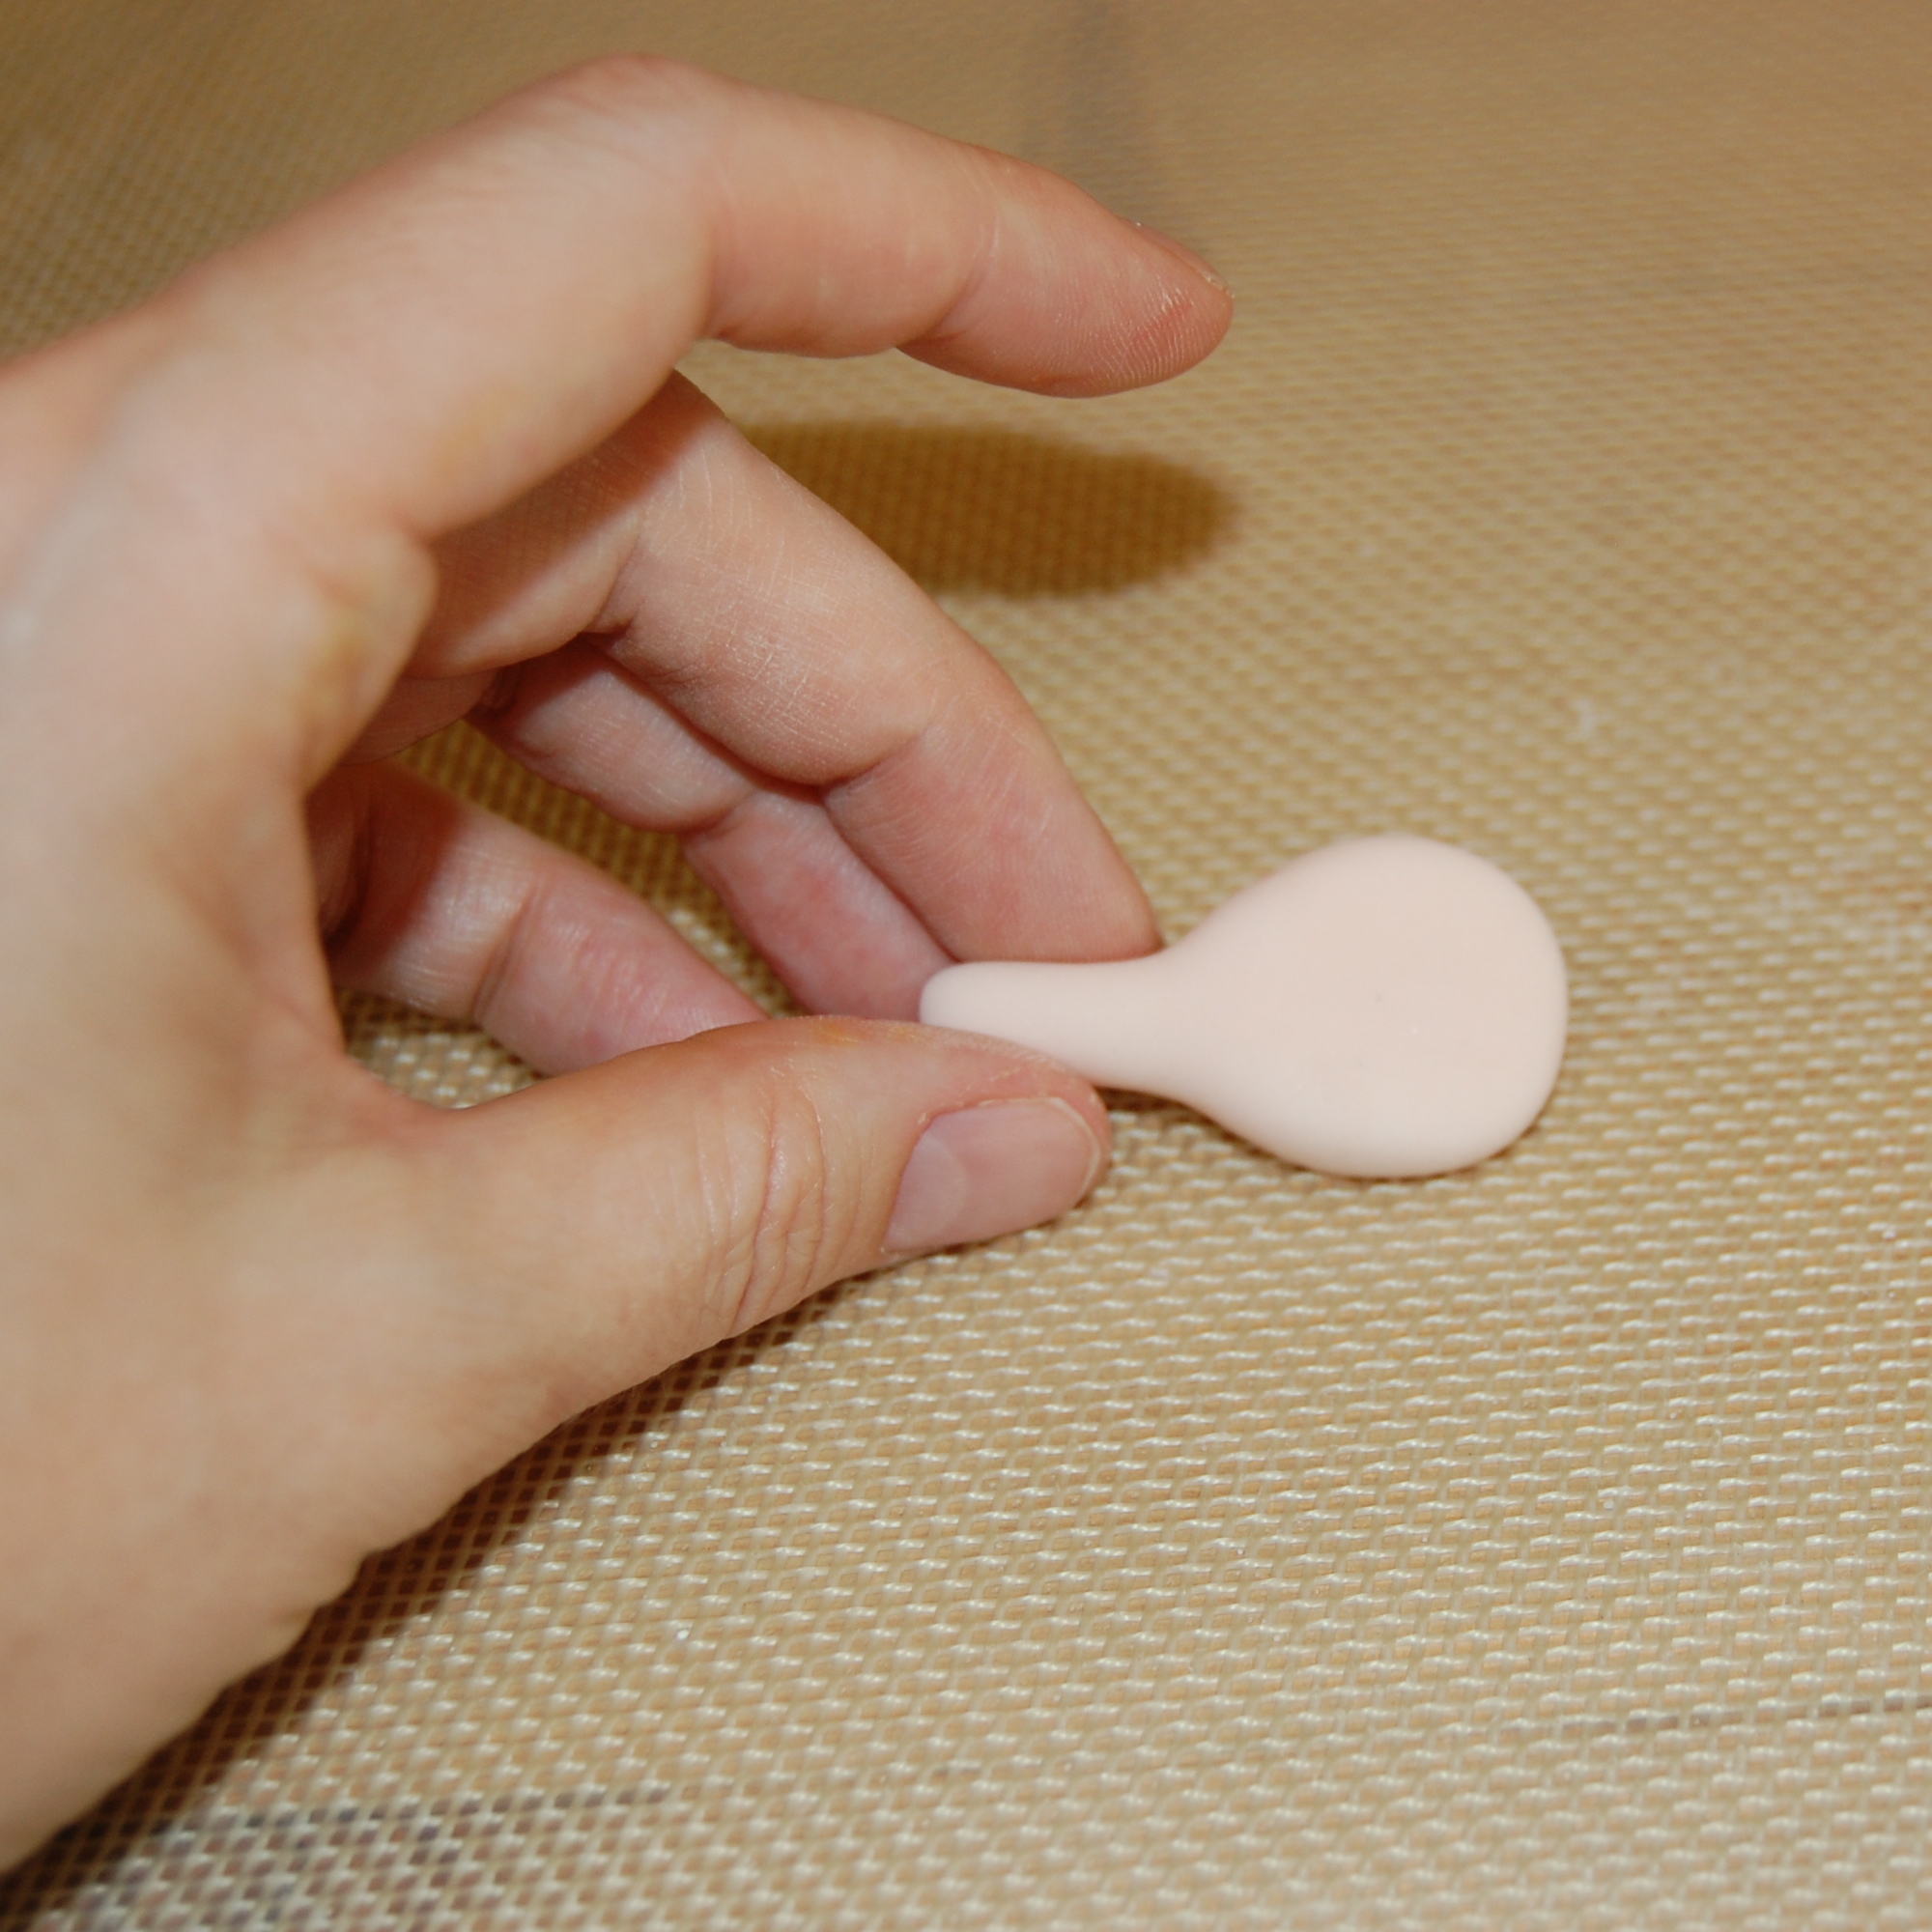 Hand Holding Tip of Fondant Between Fingers